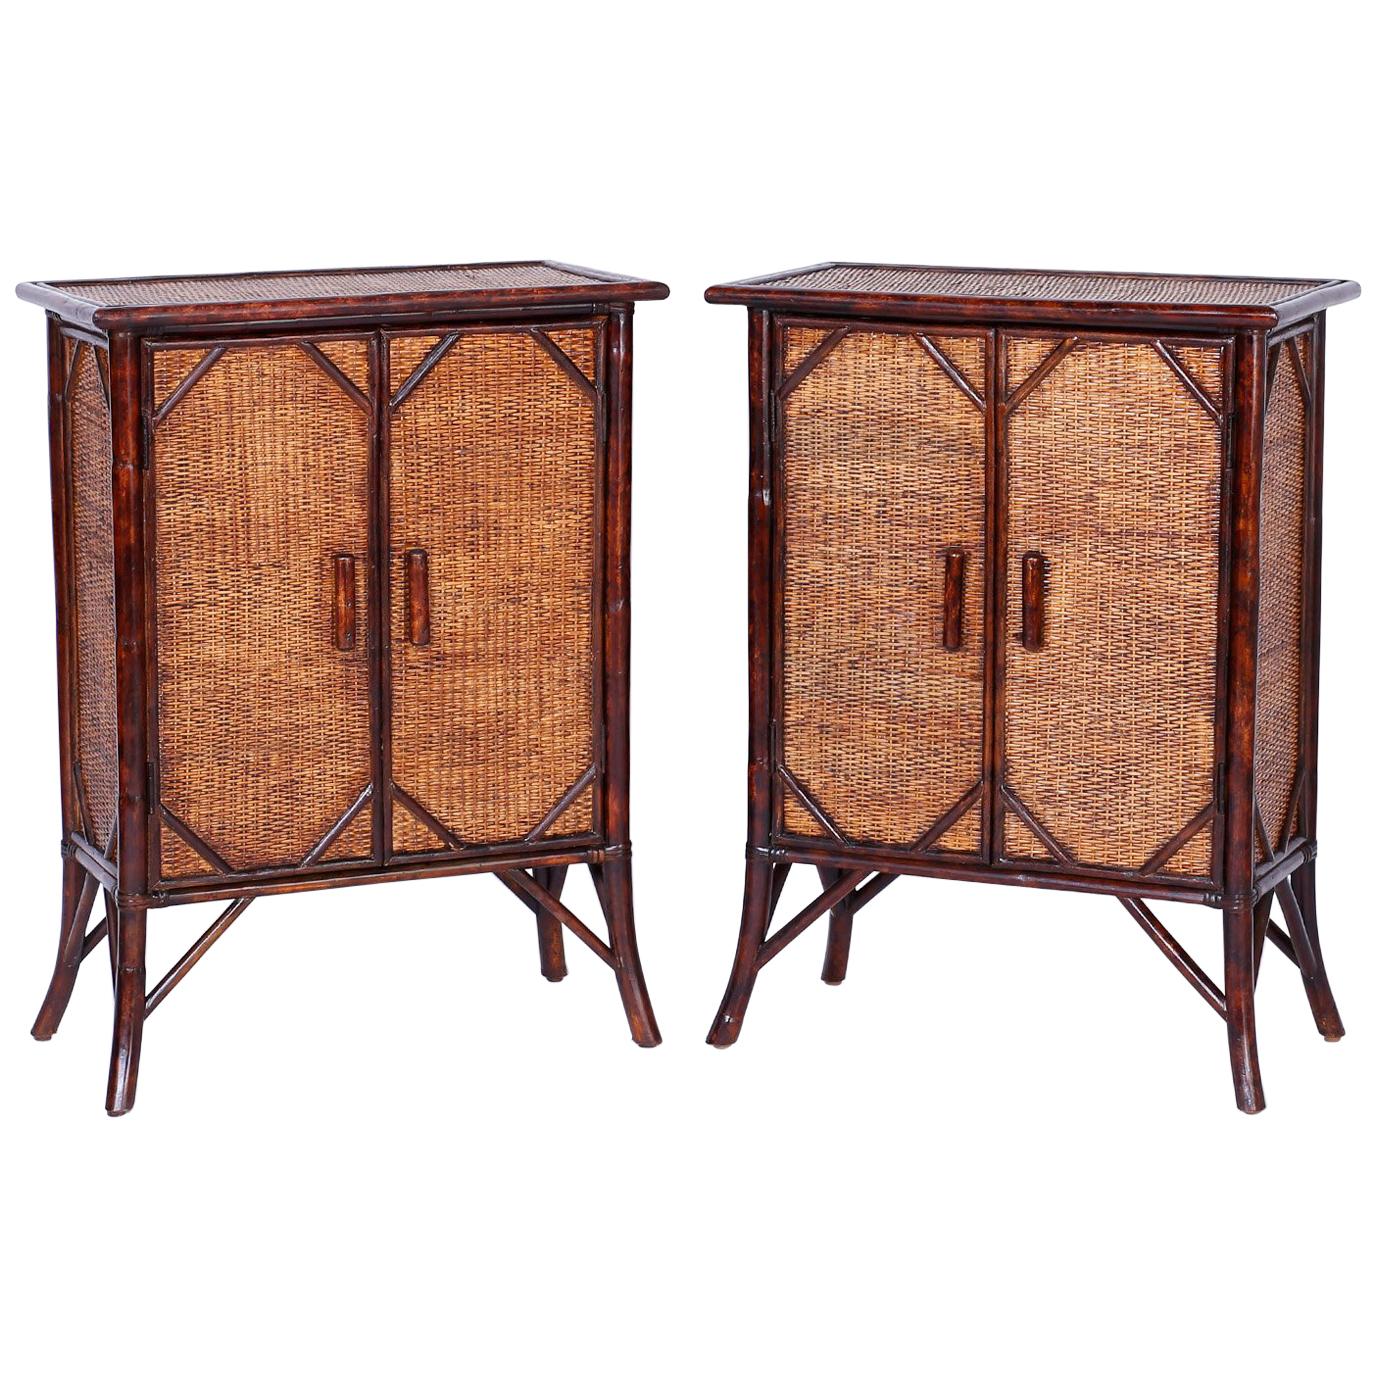 Pair of Faux Bamboo and Grasscloth British Colonial Style Cabinets or Stands